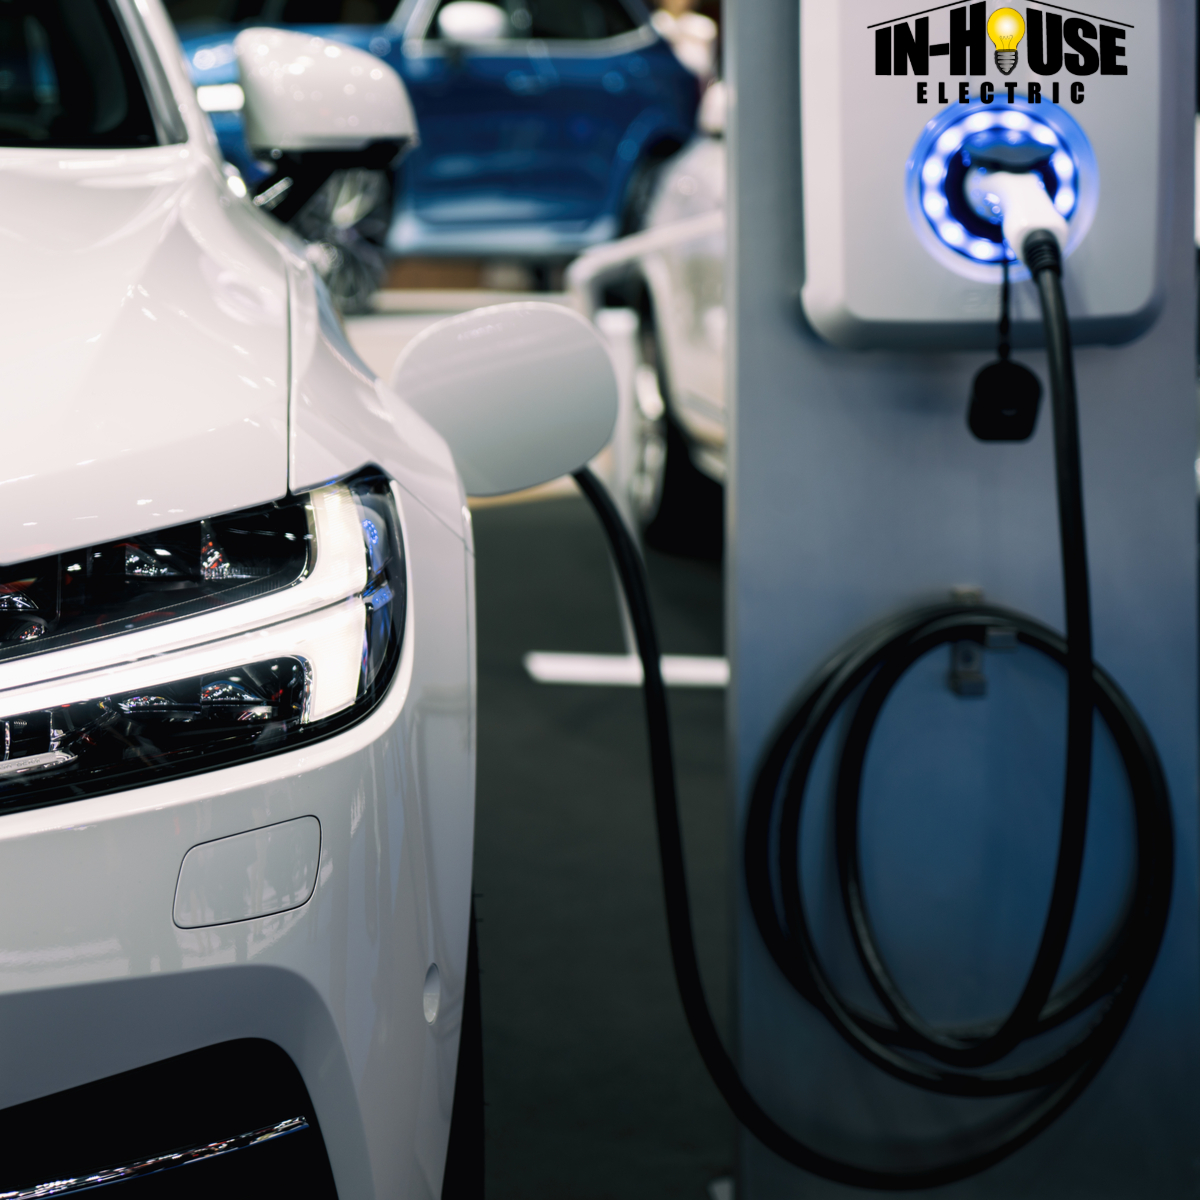 Are You Considering Installing a Home Electric Car Charging Station?